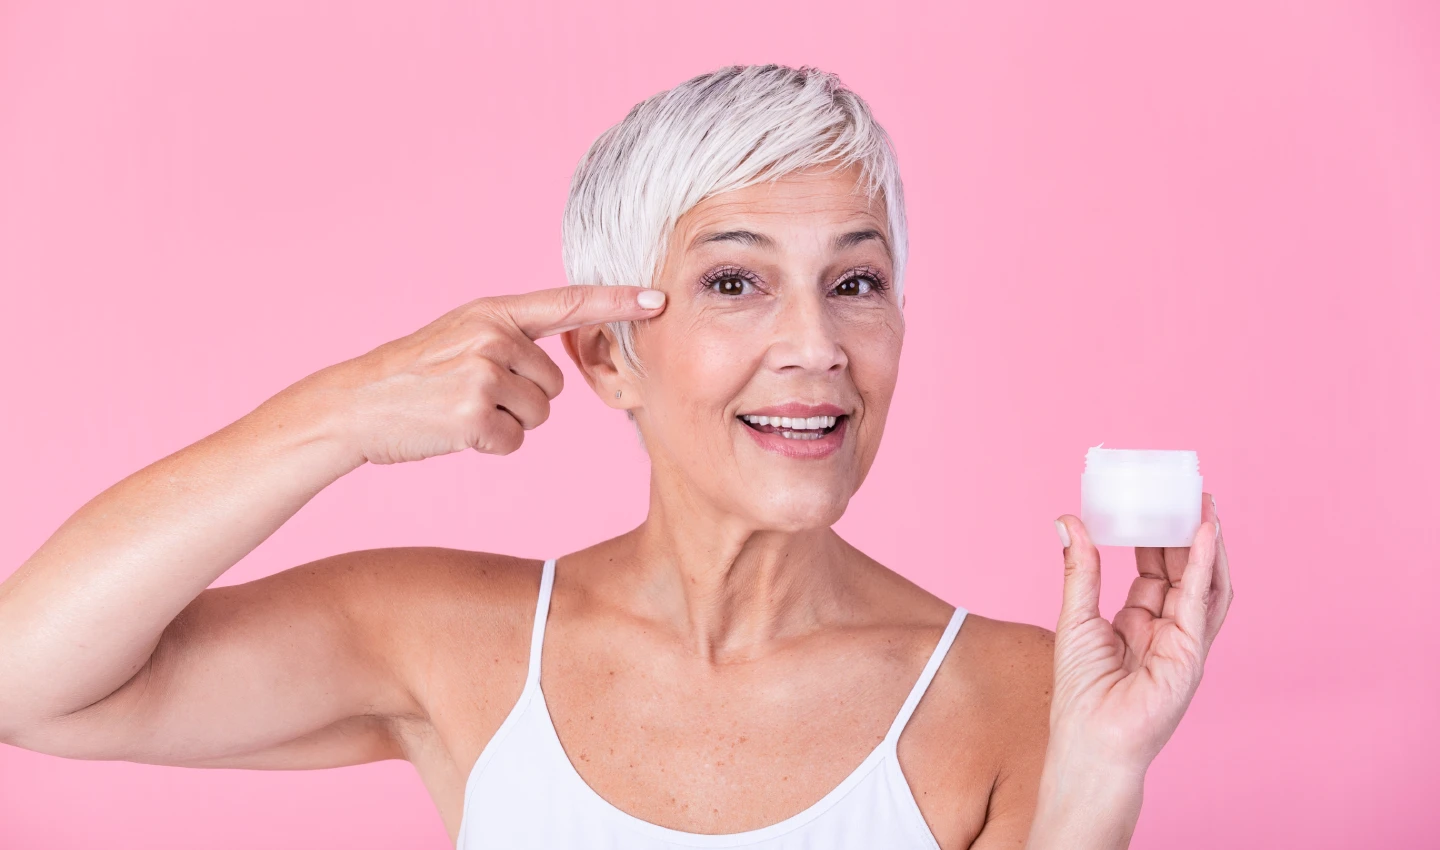 Middle-aged woman holding a jar of anti-aging moisturiser, looking happy and radiant.